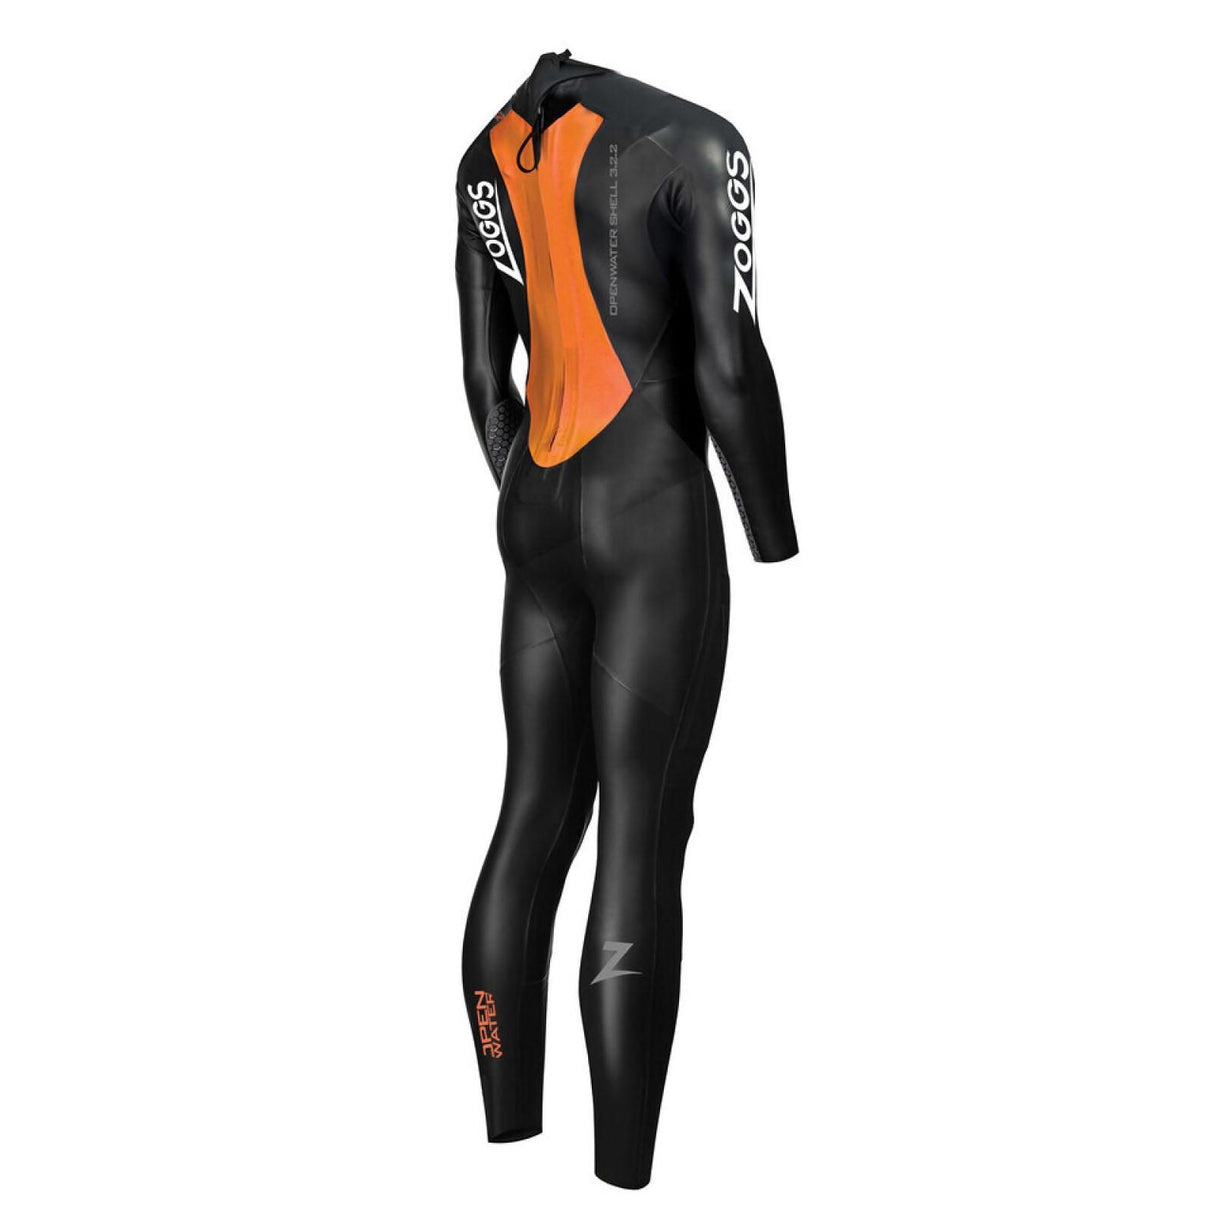 Zoggs Womens OW Shell FS Wetsuit - 3mm